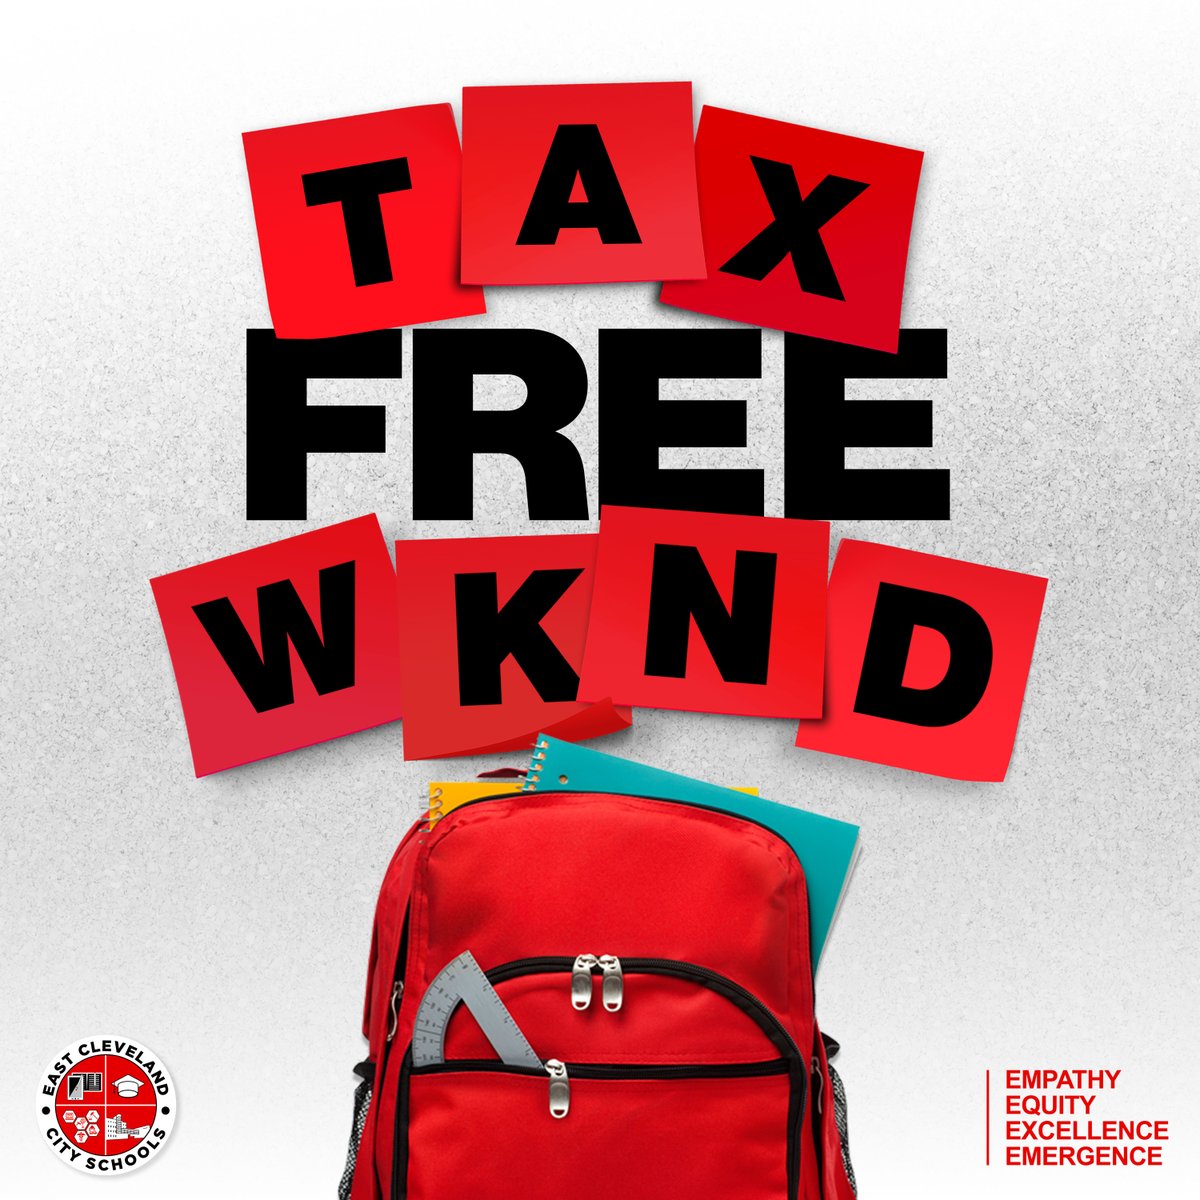 THIS WEEKEND is TAX FREE WEEKEND in Ohio! This is an EXCELLENT opportunity to get your child's supplies and materials for the upcoming school year! The suggested school supply list is posted on the East Cleveland City Schools website and the link is in our bio! #FlyWithUs